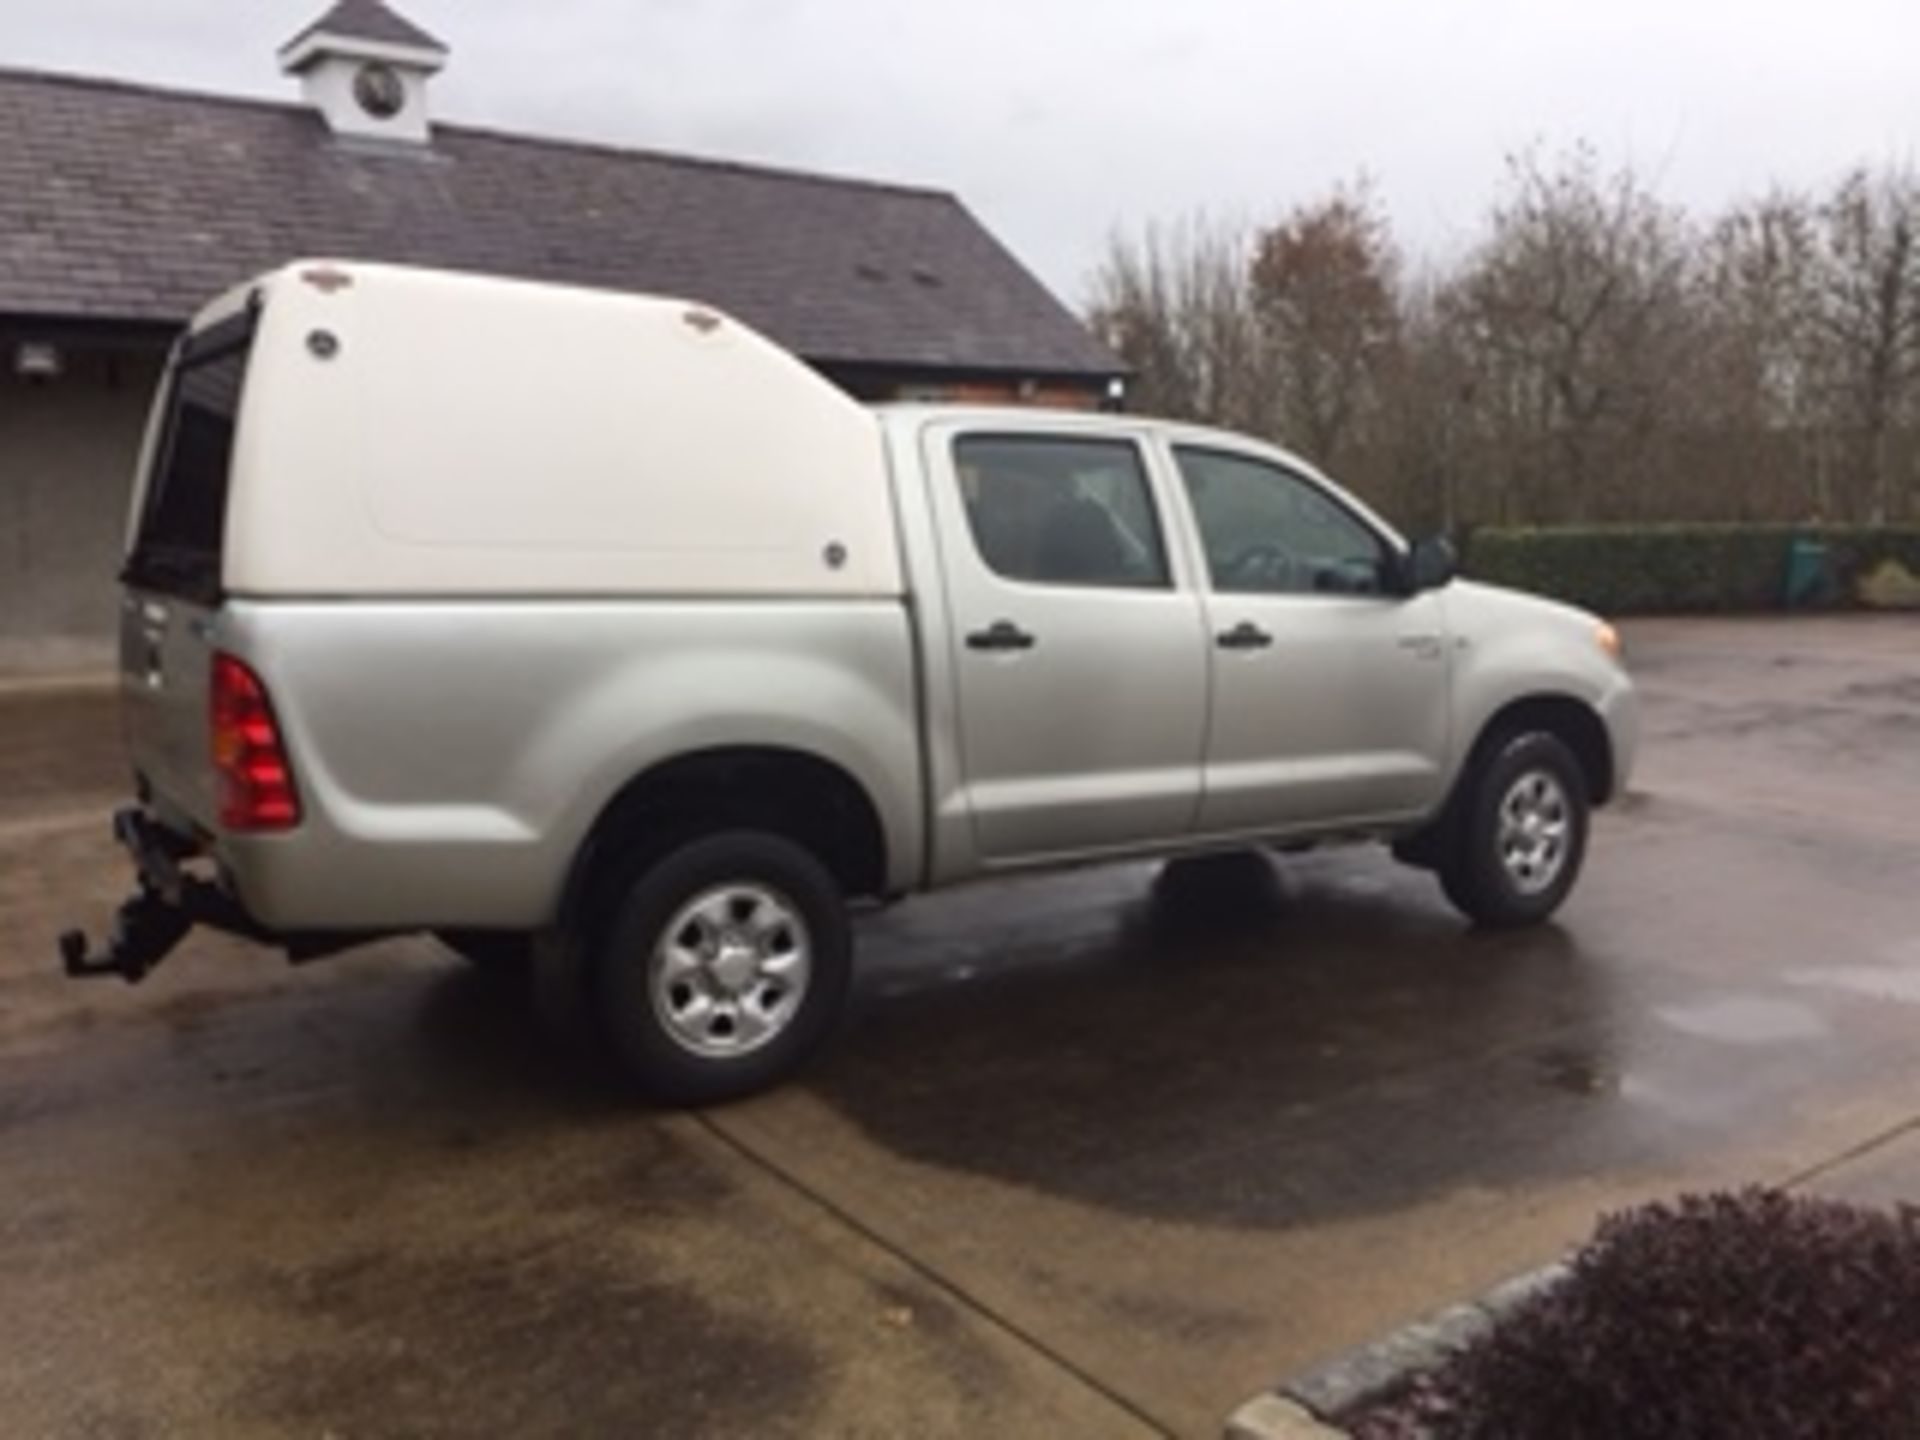 2008 (Feb) Toyota Hilux Double Cab Pickup c/w Canopy, 63000 miles Reg - CGZ 2727 - Image 2 of 6